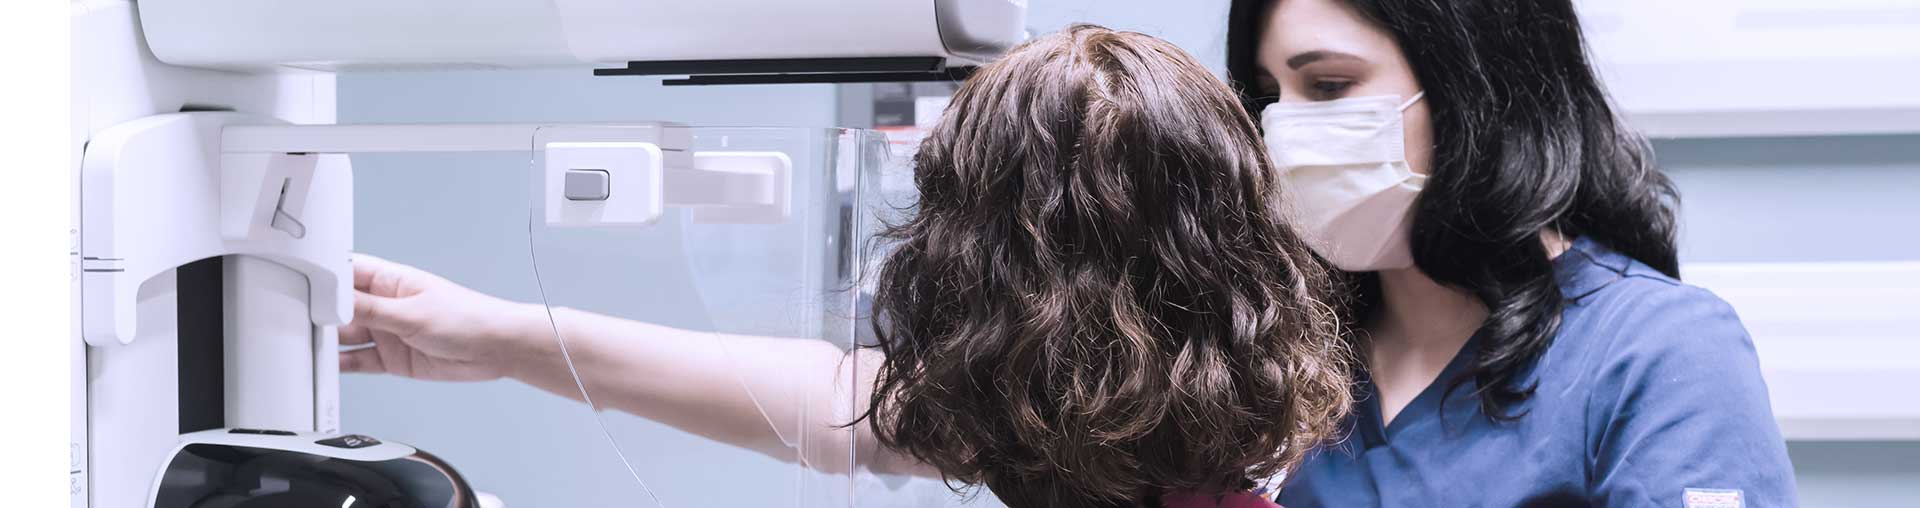 patient gets a mammogram at the UVA Health breast care center